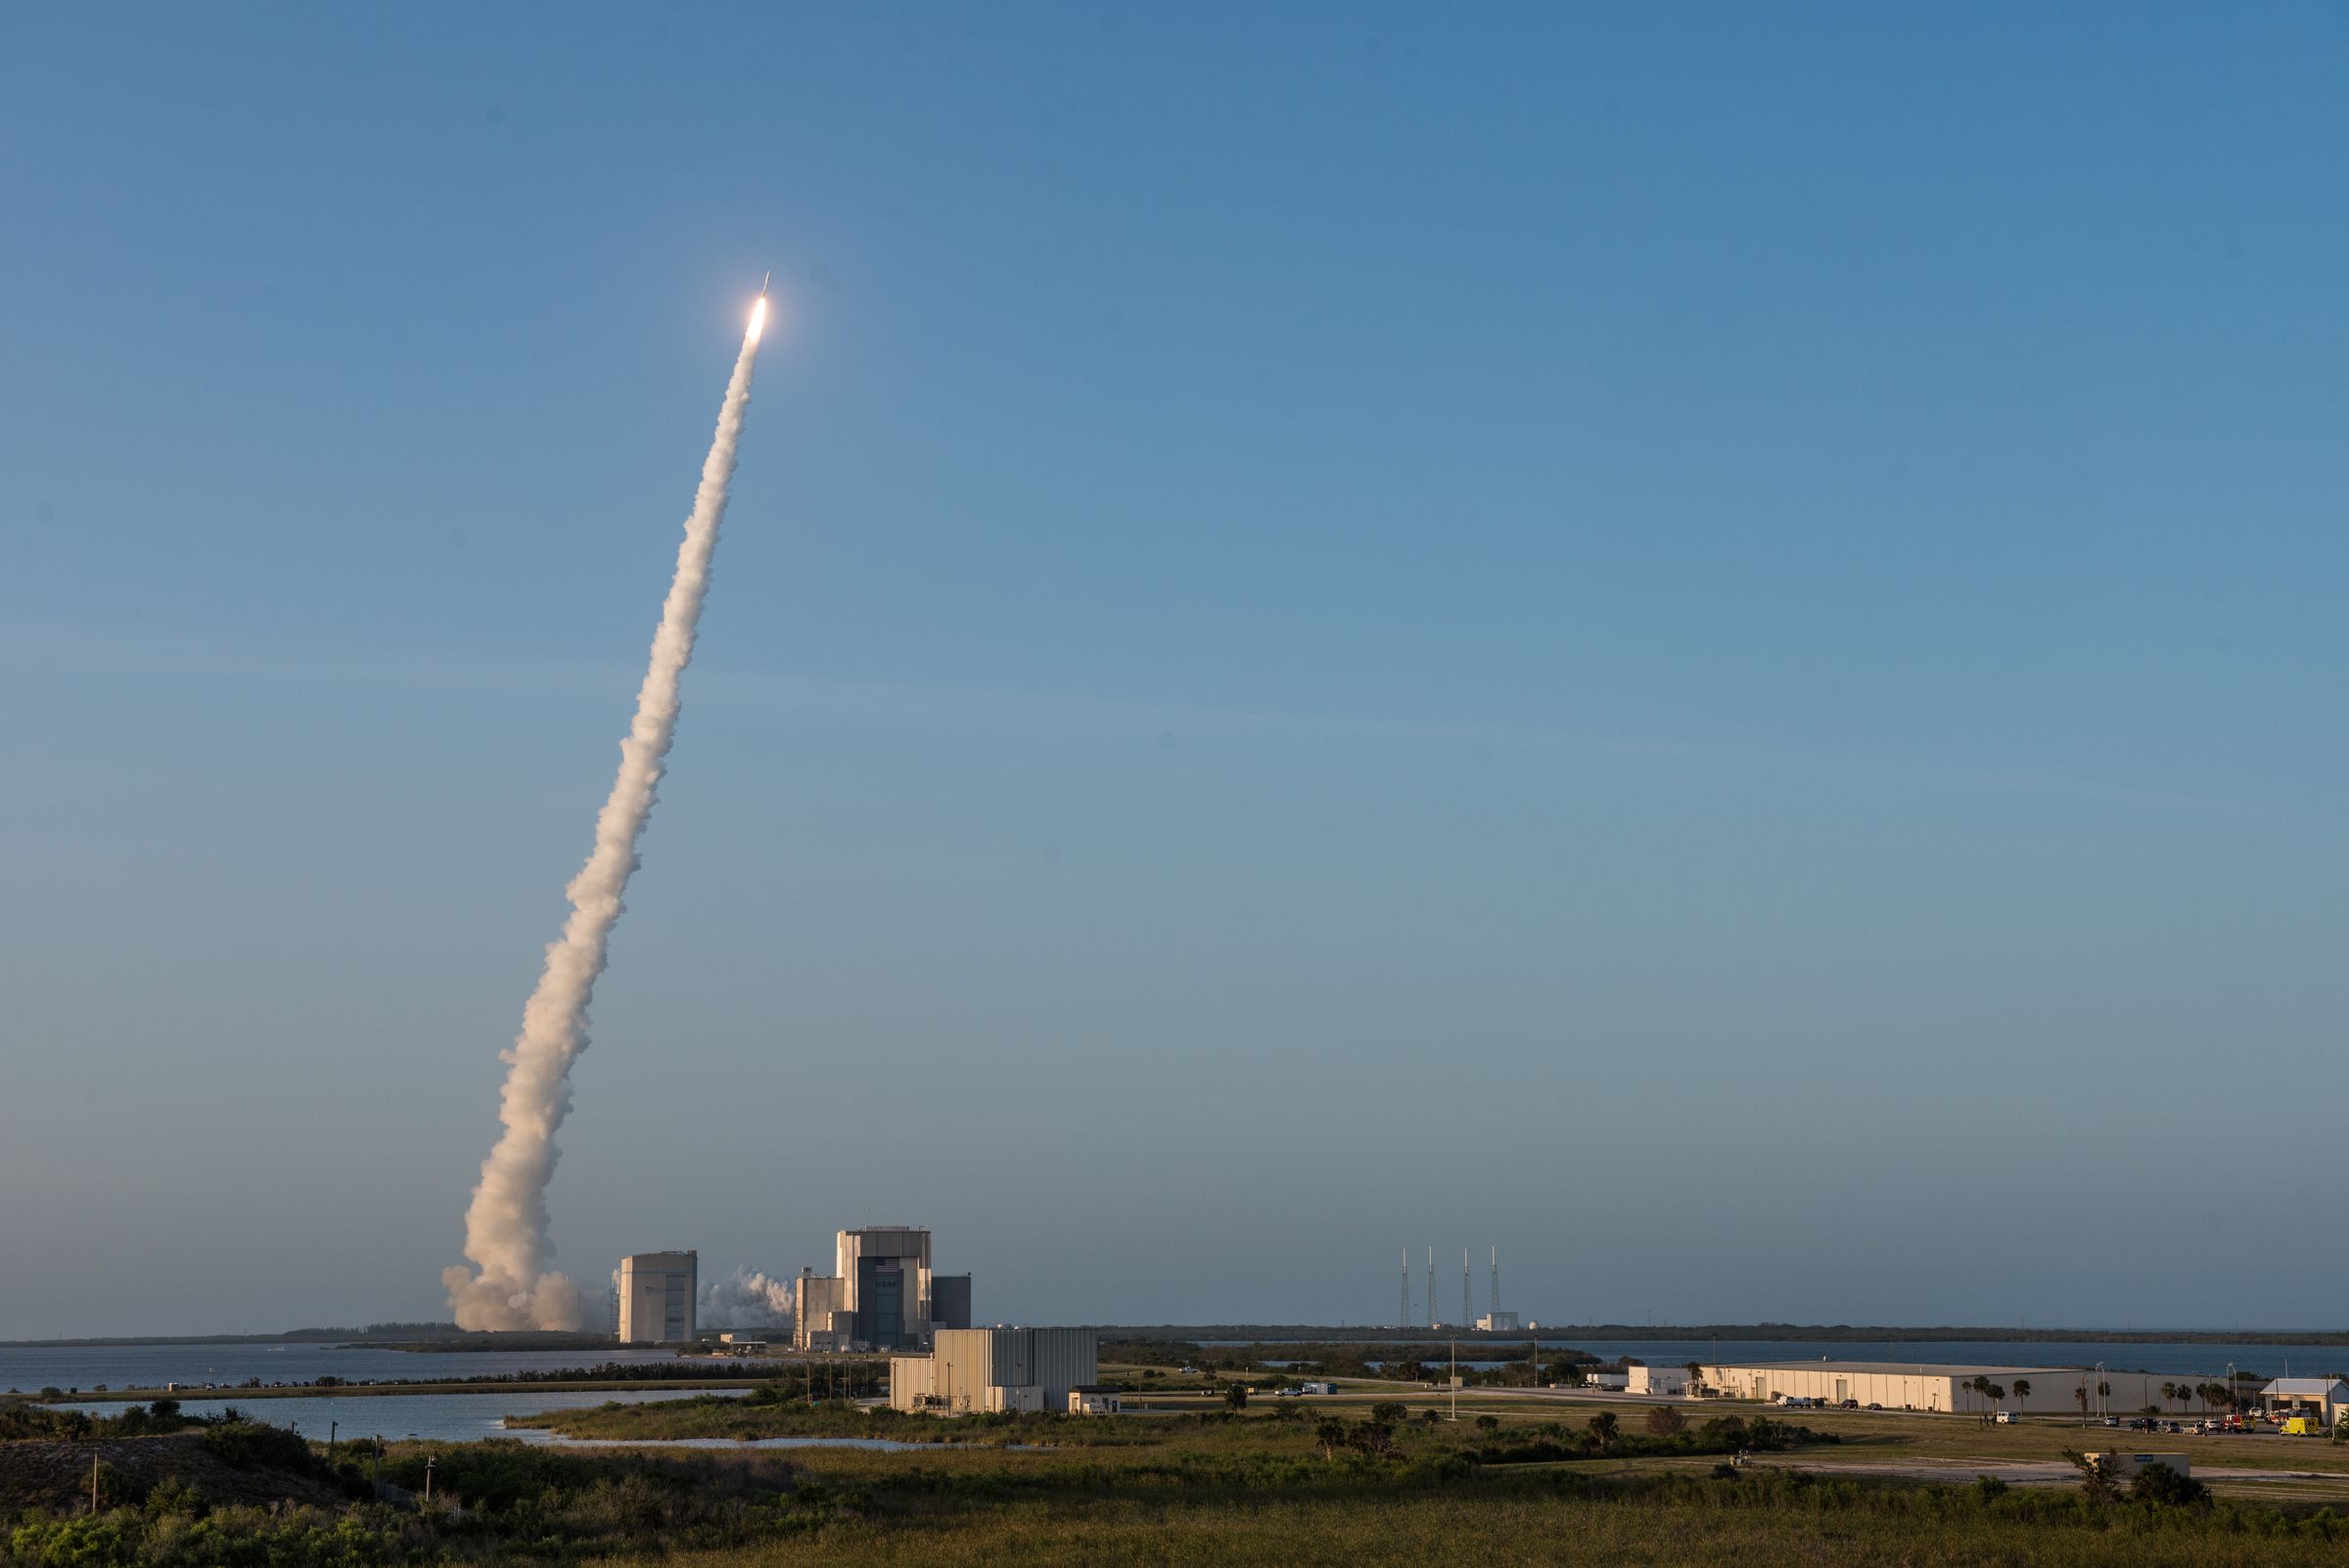 An Atlas V rocket lifting off from Cape Canaveral, Florida.